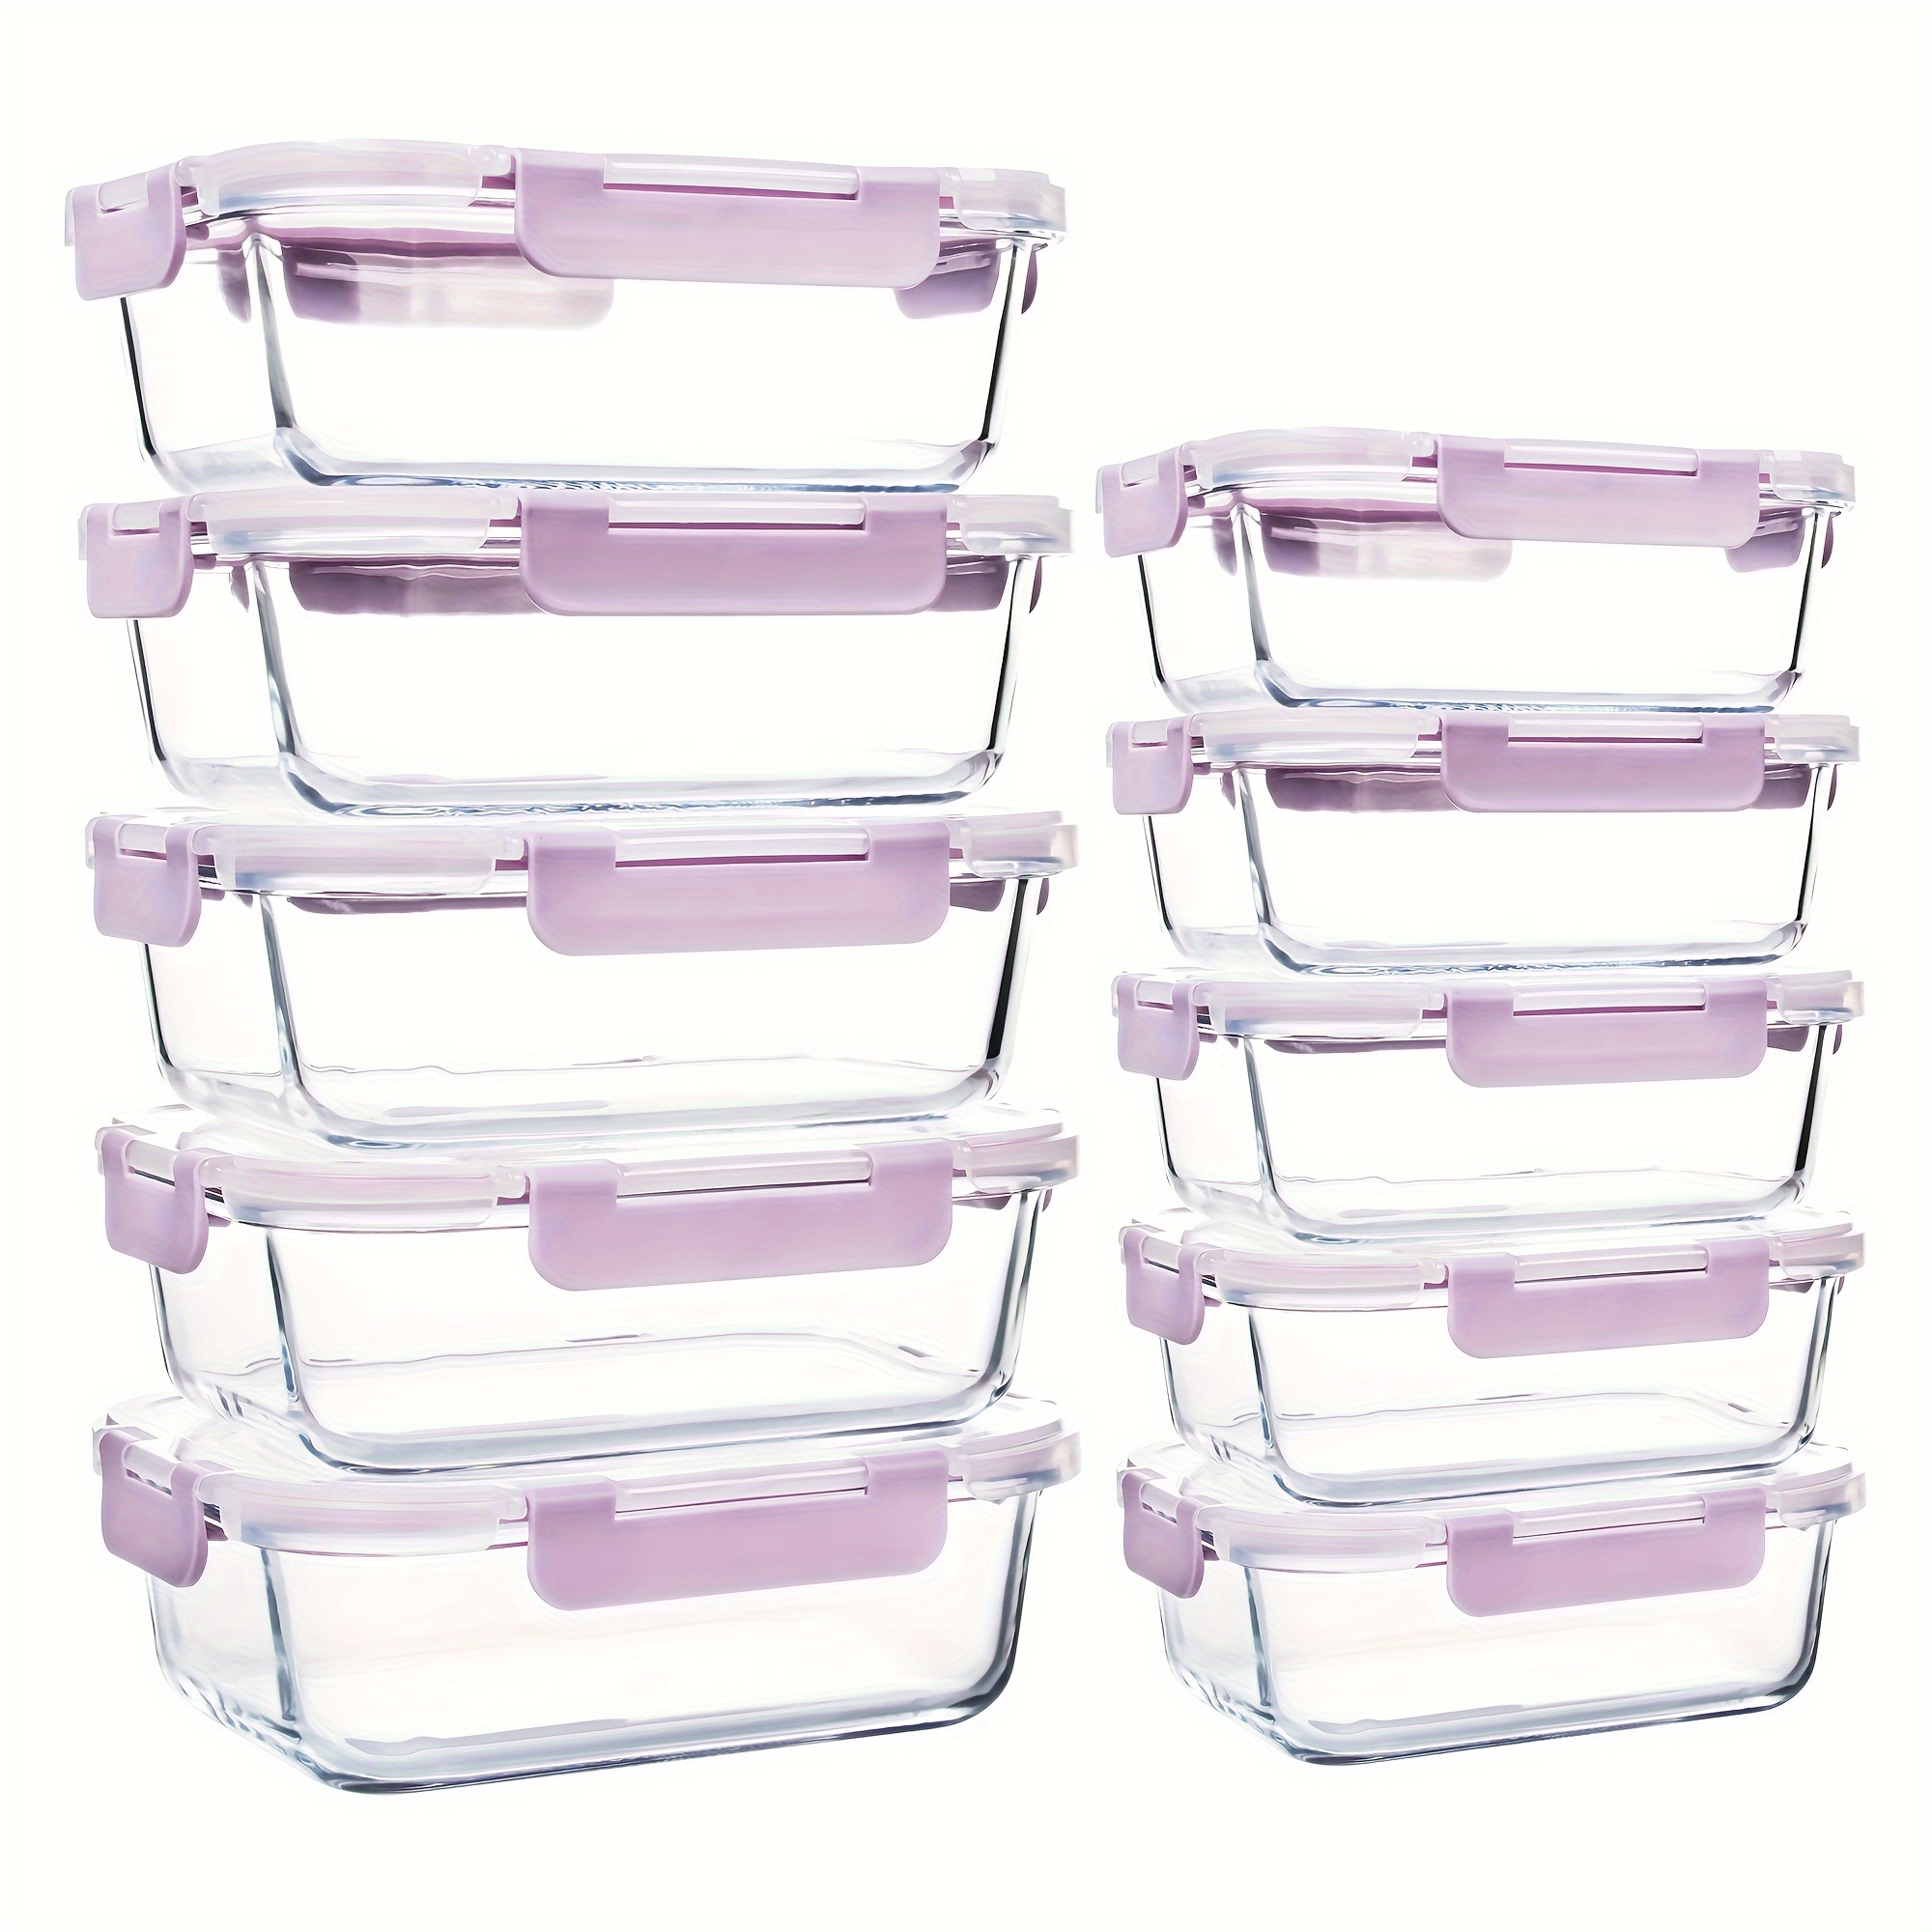 

10pcs Glass Meal Prep Containers, Food Storage Containers With Lids Airtight, Glass Lunch Boxes, Microwave, Oven, Freezer And Dishwasher Safe